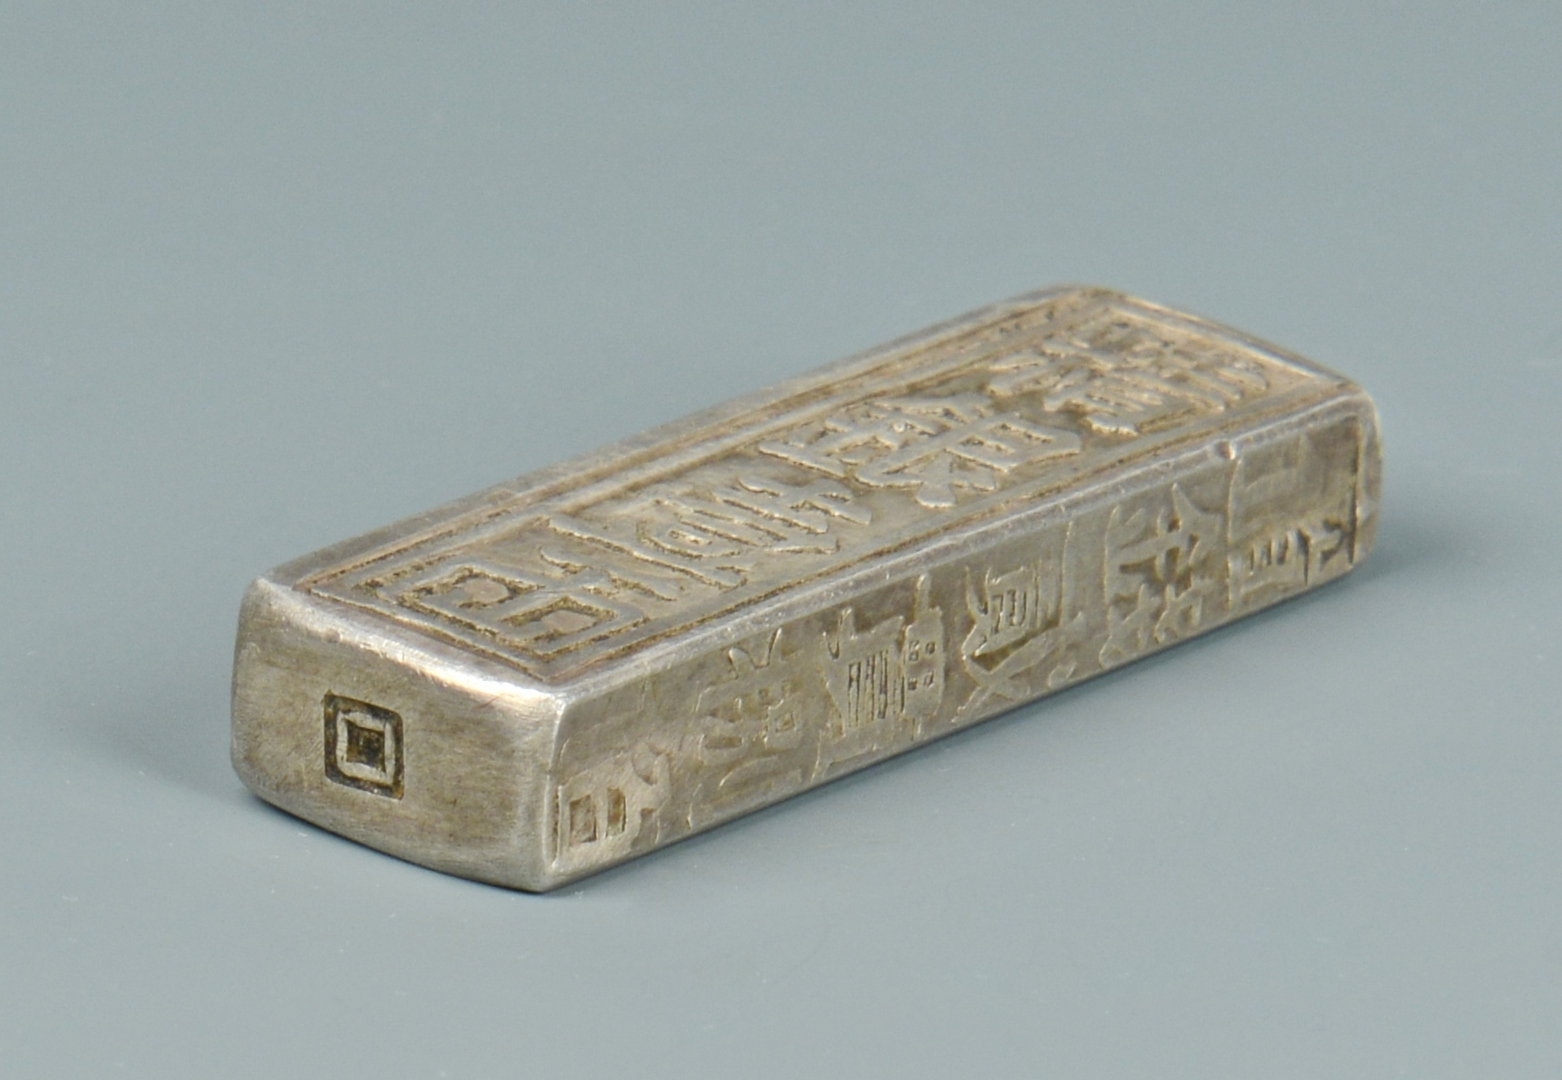 Lot 3088098: 2 Asian Silver Ignots